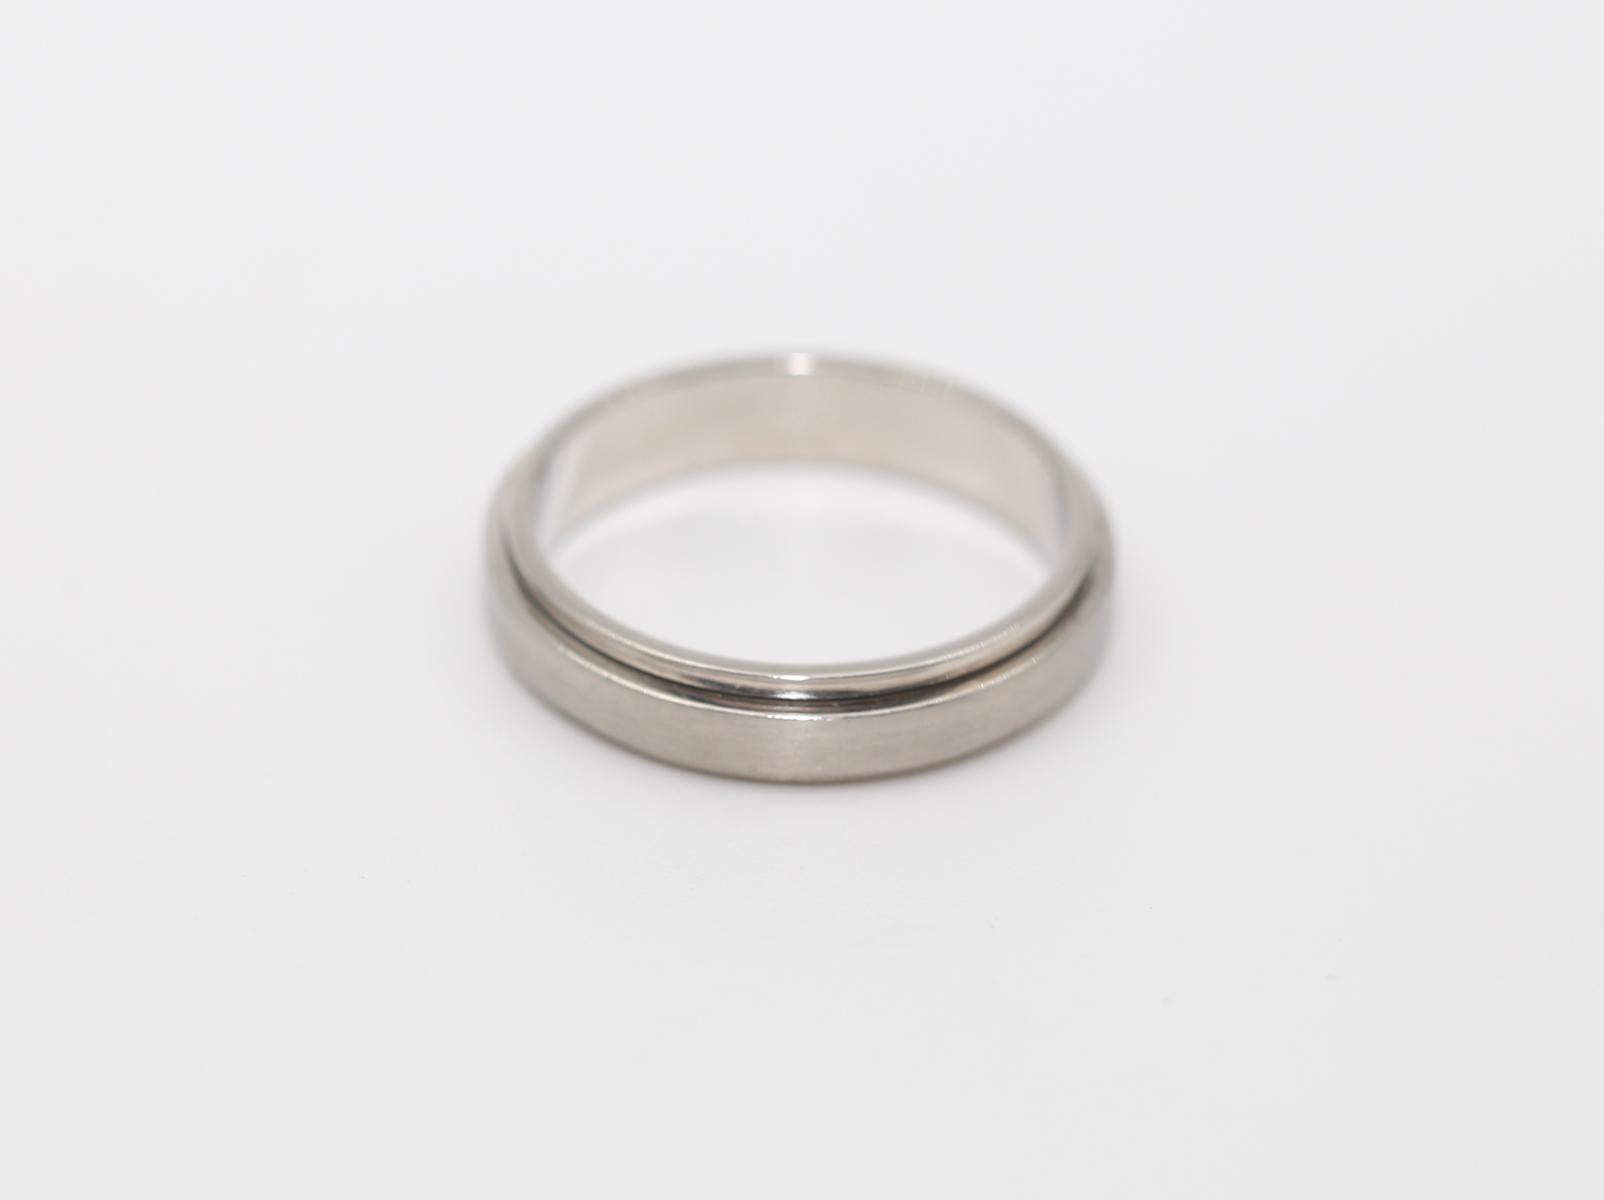 
Piaget Possession Revolving Band Platinum Ring Signed and Stamped. 
Piaget Platinum Possession Ring. A modern ring for a special occasion created and finely crafted by one of the world's best jewelry houses. Piaget's 'Possession' ring is defined by